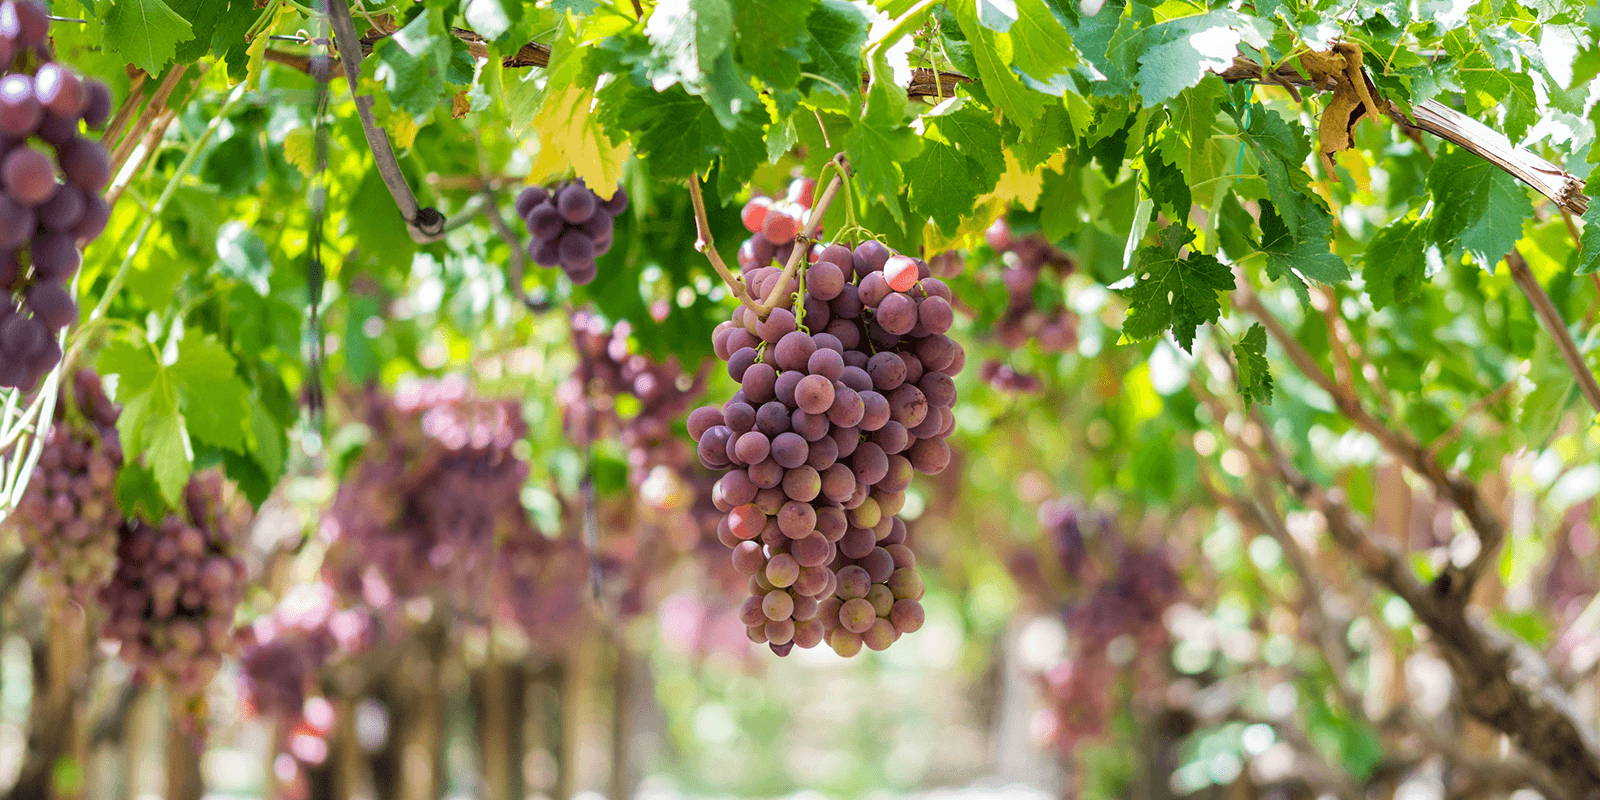 Grape vines with red grapes.